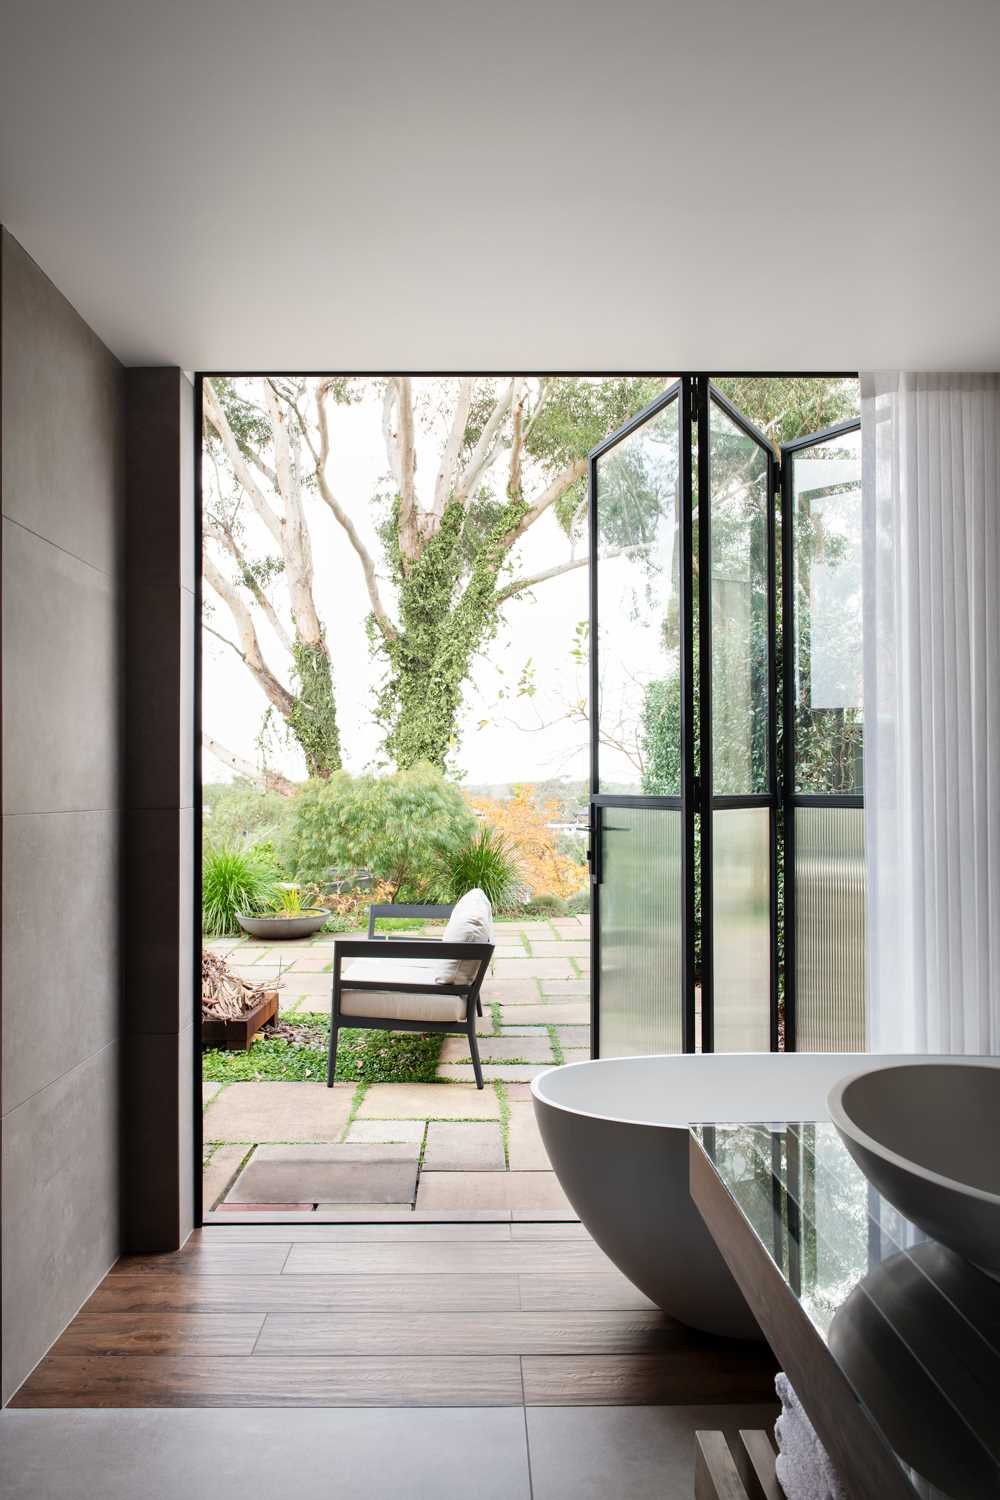 The black-framed steel glass doors connect to the completely private garden, while the soft curtain creates a softness for the bathroom.